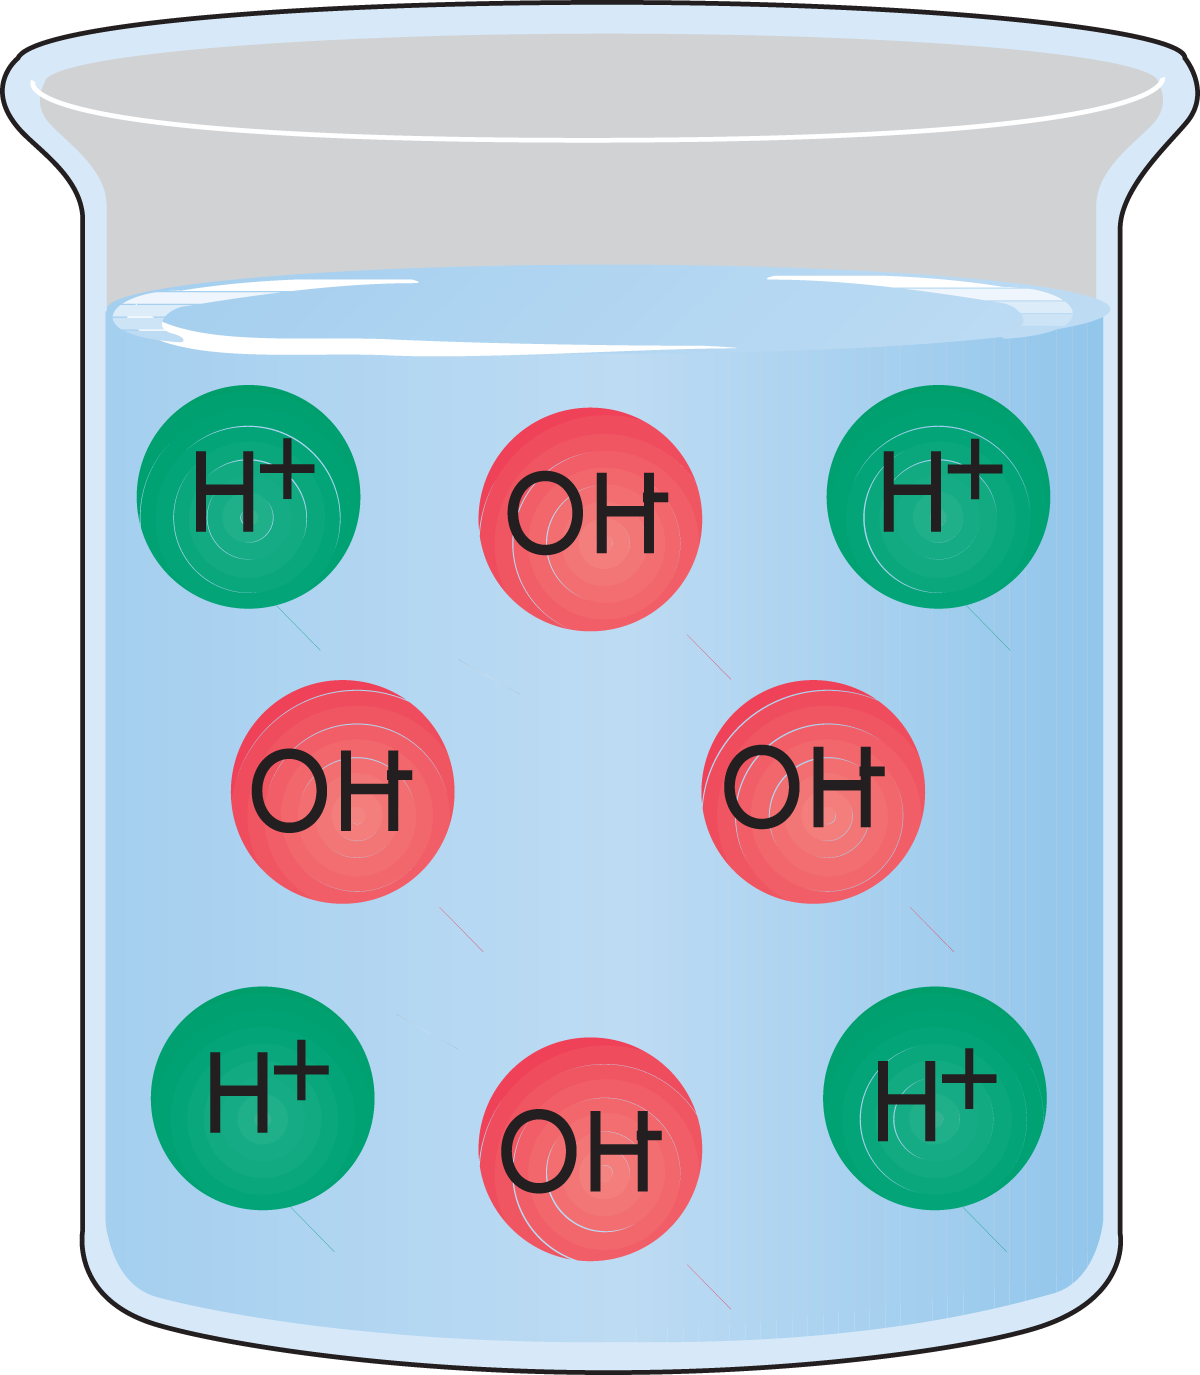 Vector scientific chemical illustration of concentration isolated on white.  Low concentration and high concentration of a solution in a beaker or  container. Particles such as molecules, ions, atoms. Stock Vector